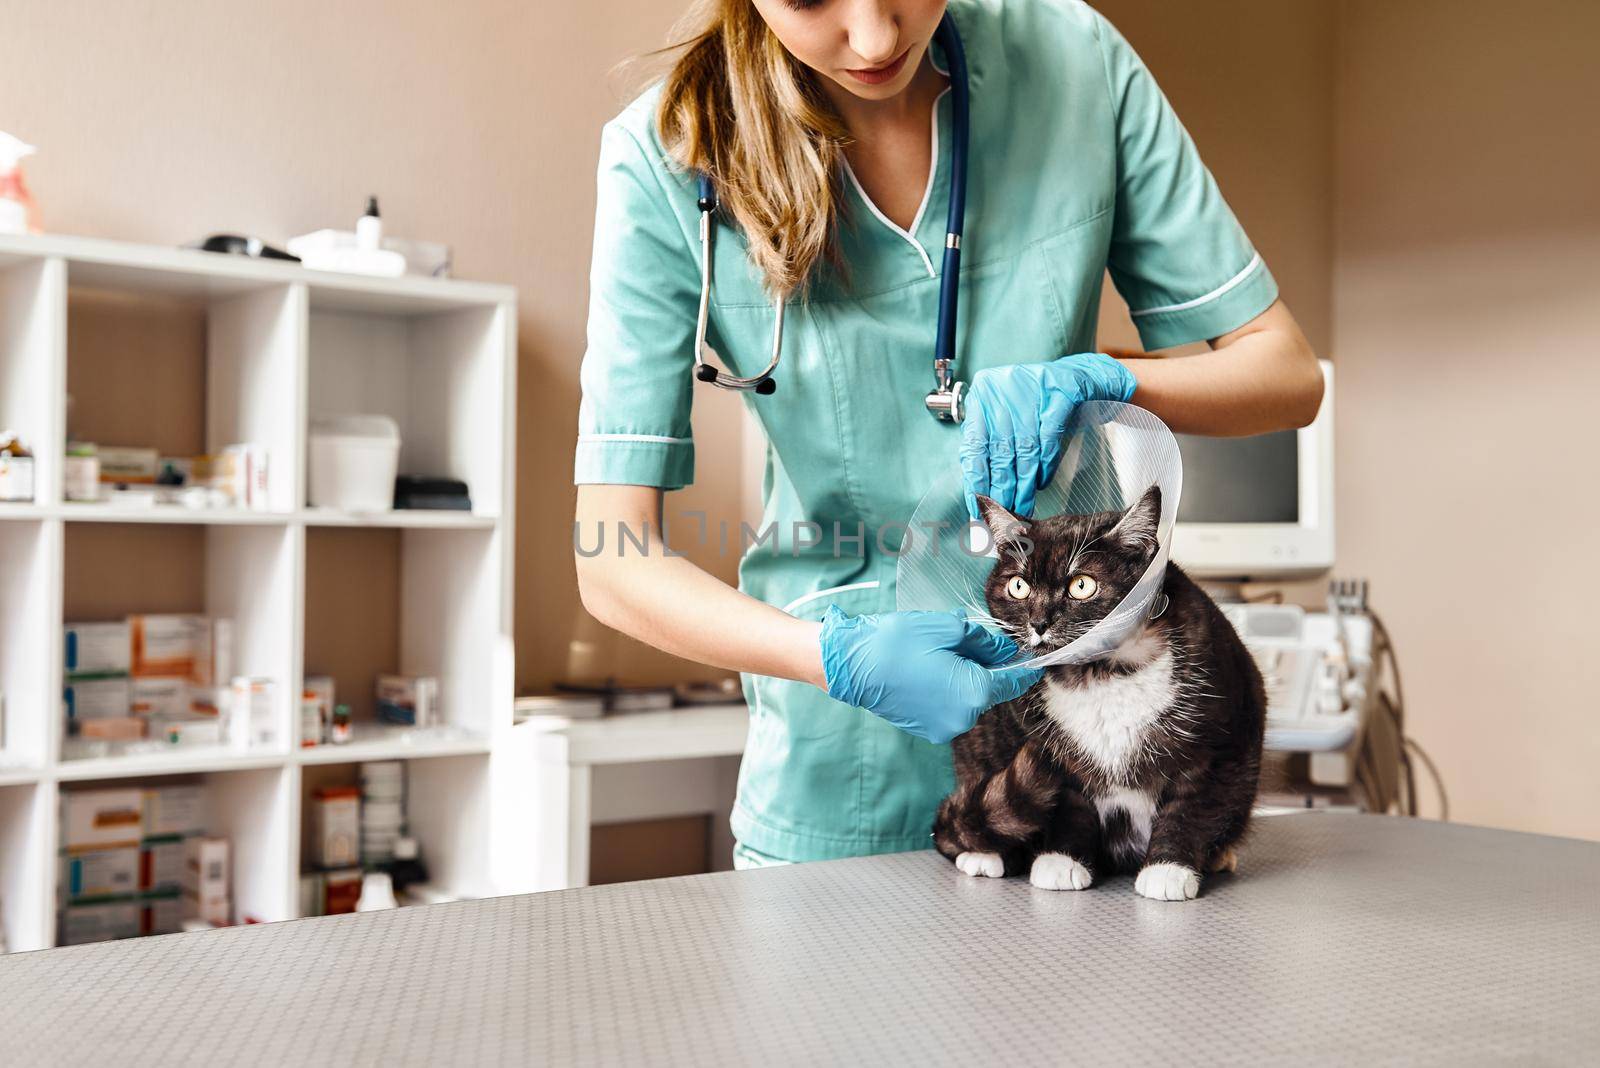 Working process. Female veterinarian in work uniform putting on a protective plastic collar to a large black cat lying on the table in veterinary clinic by friendsstock